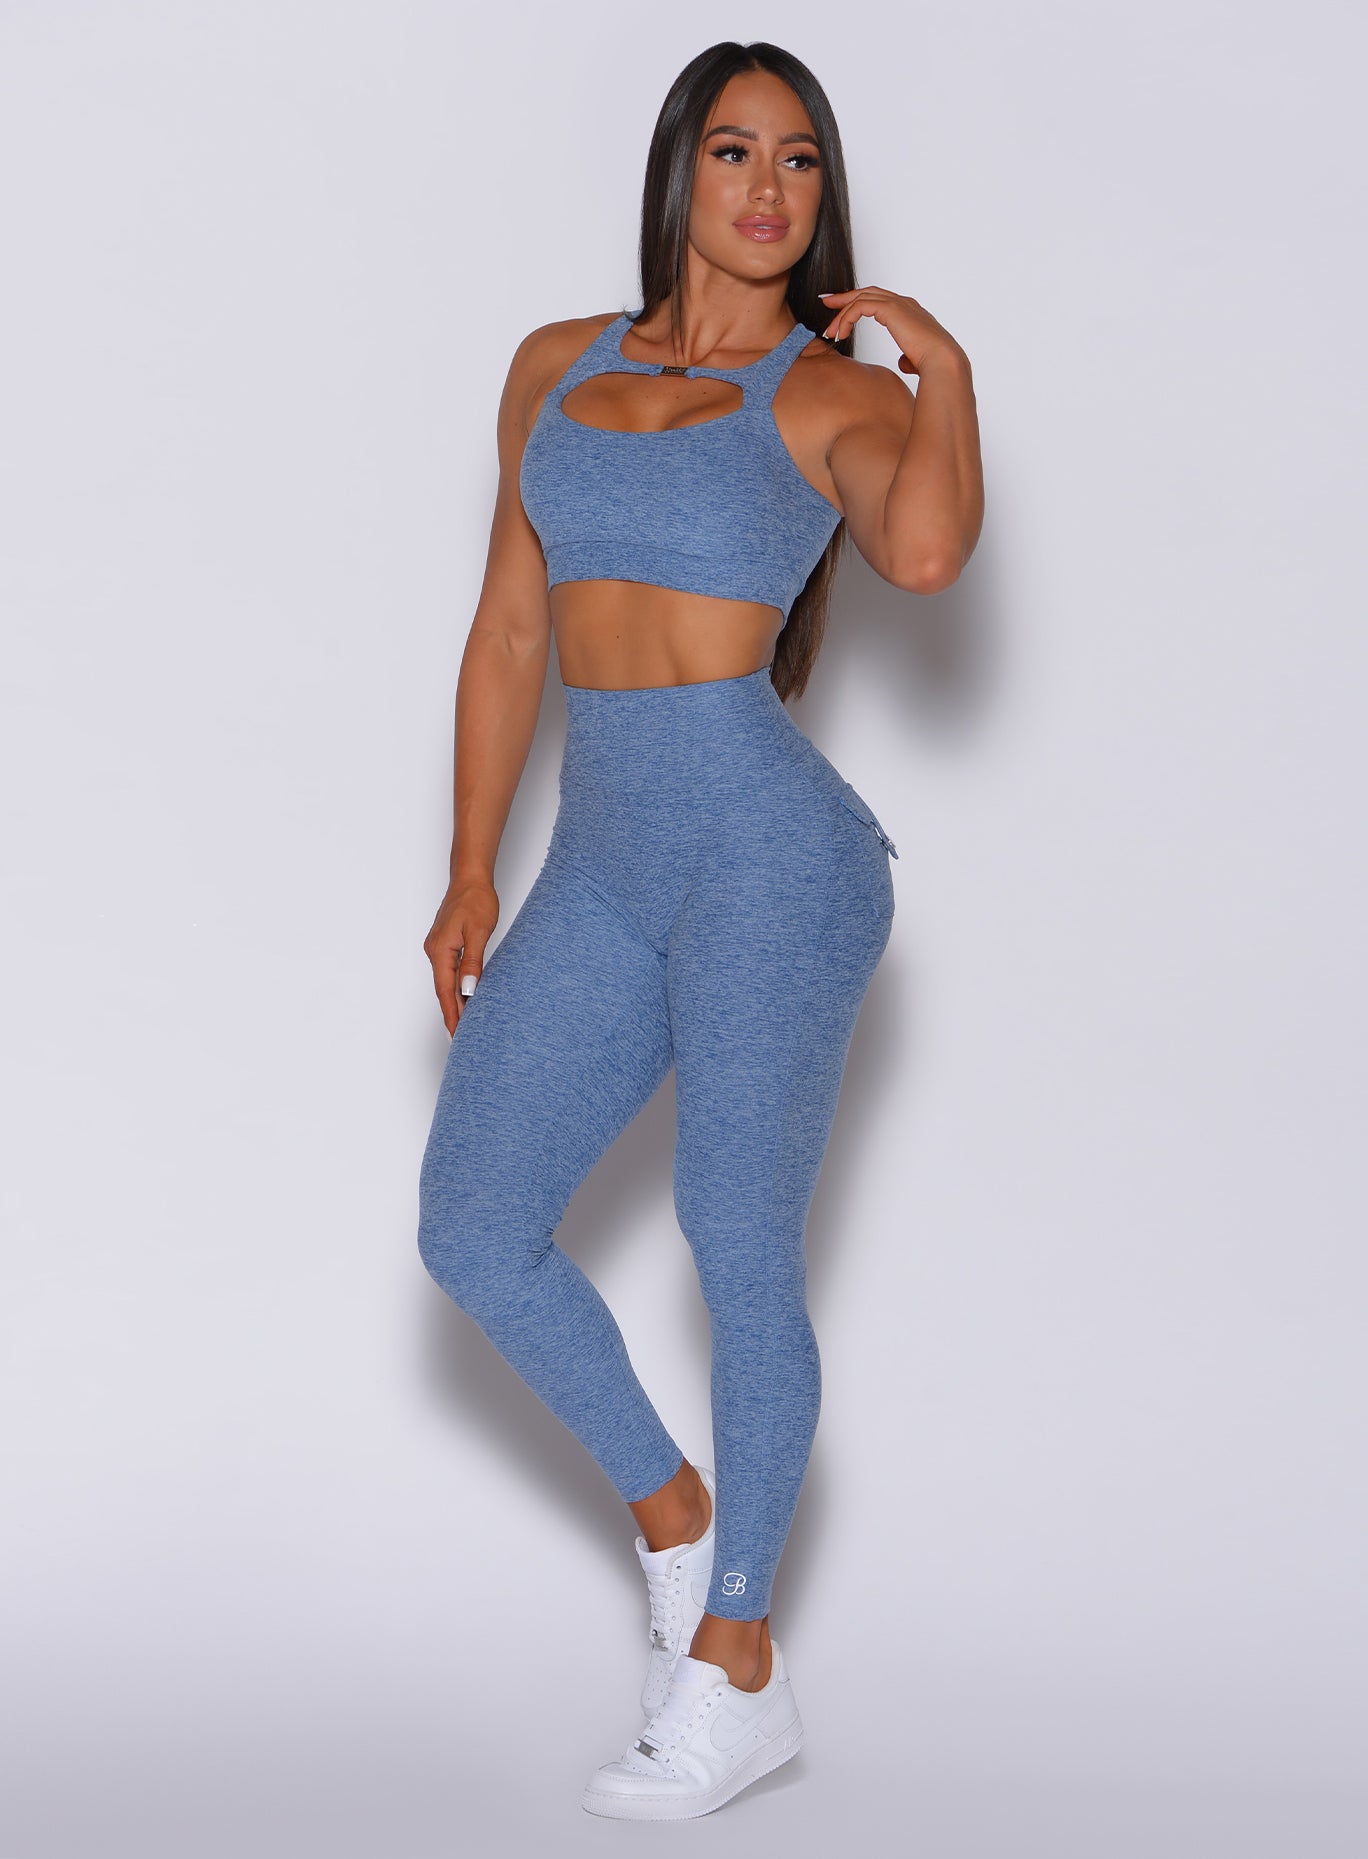 Front profile view of a model wearing our Pocket Pop Leggings in sky blue color and a matching sports bra